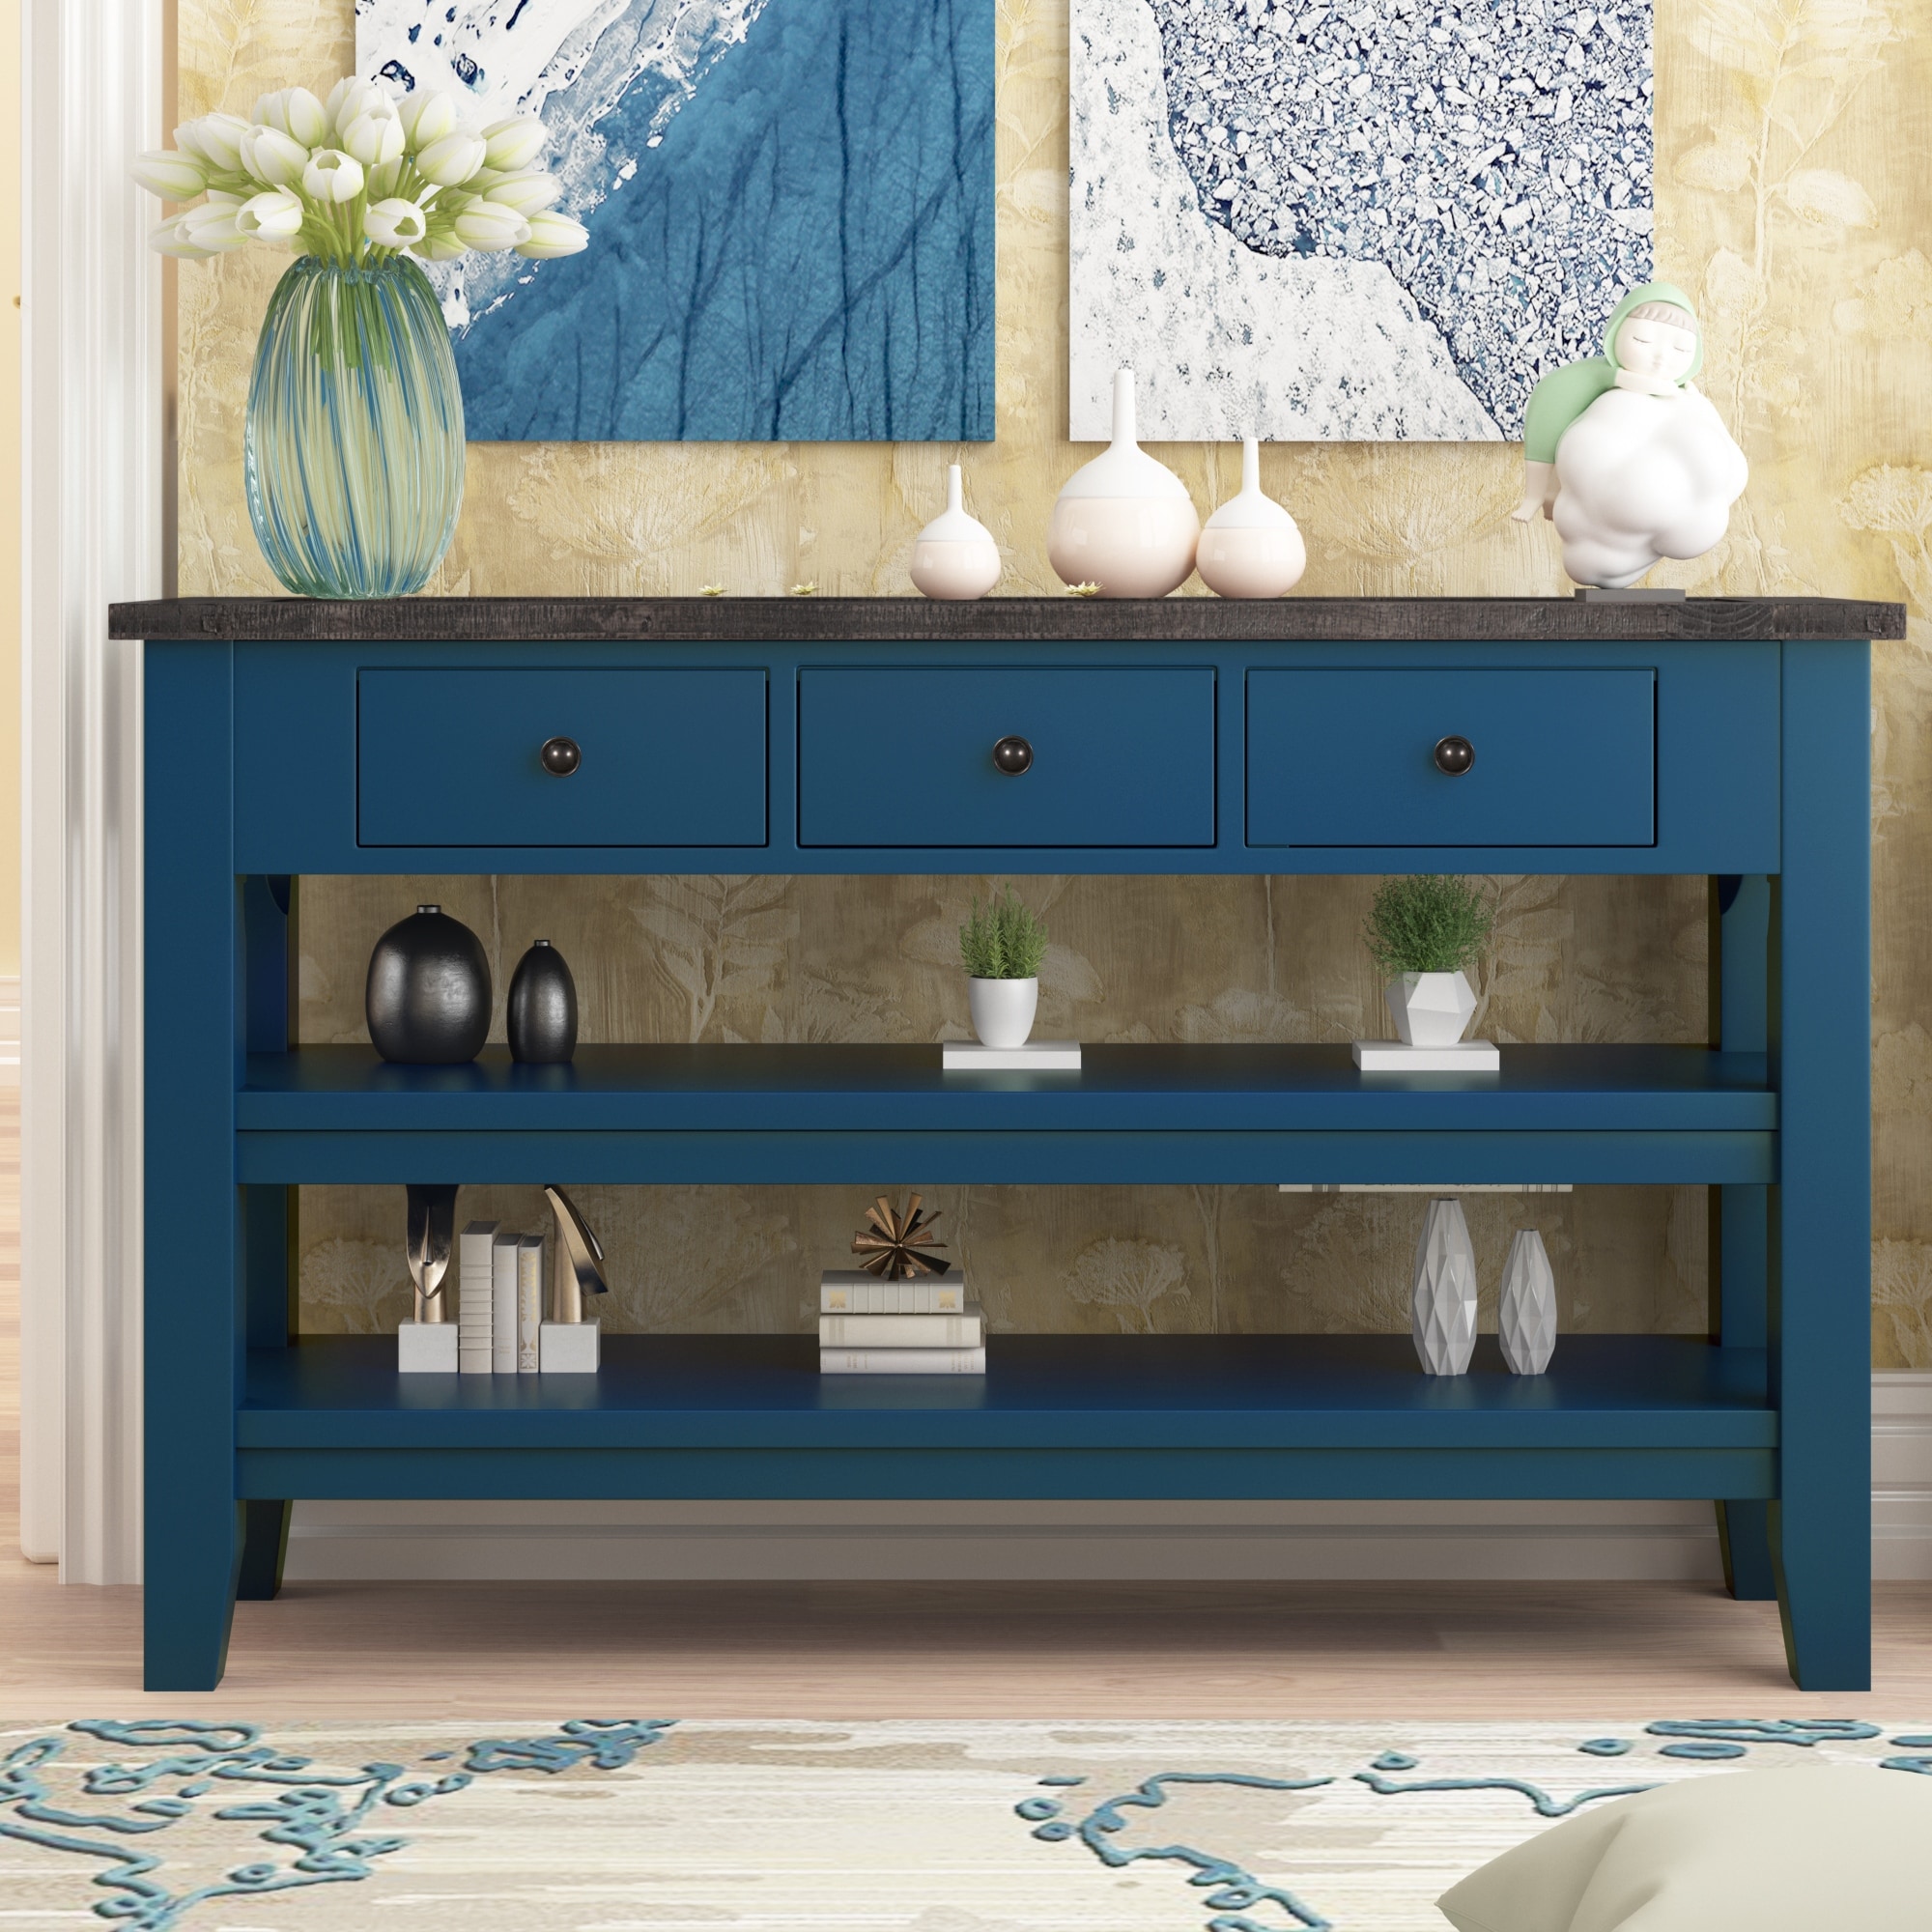 https://ak1.ostkcdn.com/images/products/is/images/direct/ecb4187fd897ef6abeea7e4f3fdb27dda697b204/Vintage-48%22-Console-Table-with-3-Drawers-%26-2-Open-Shelves%2C-Solid-Wood-Top-for-Living-Room.jpg